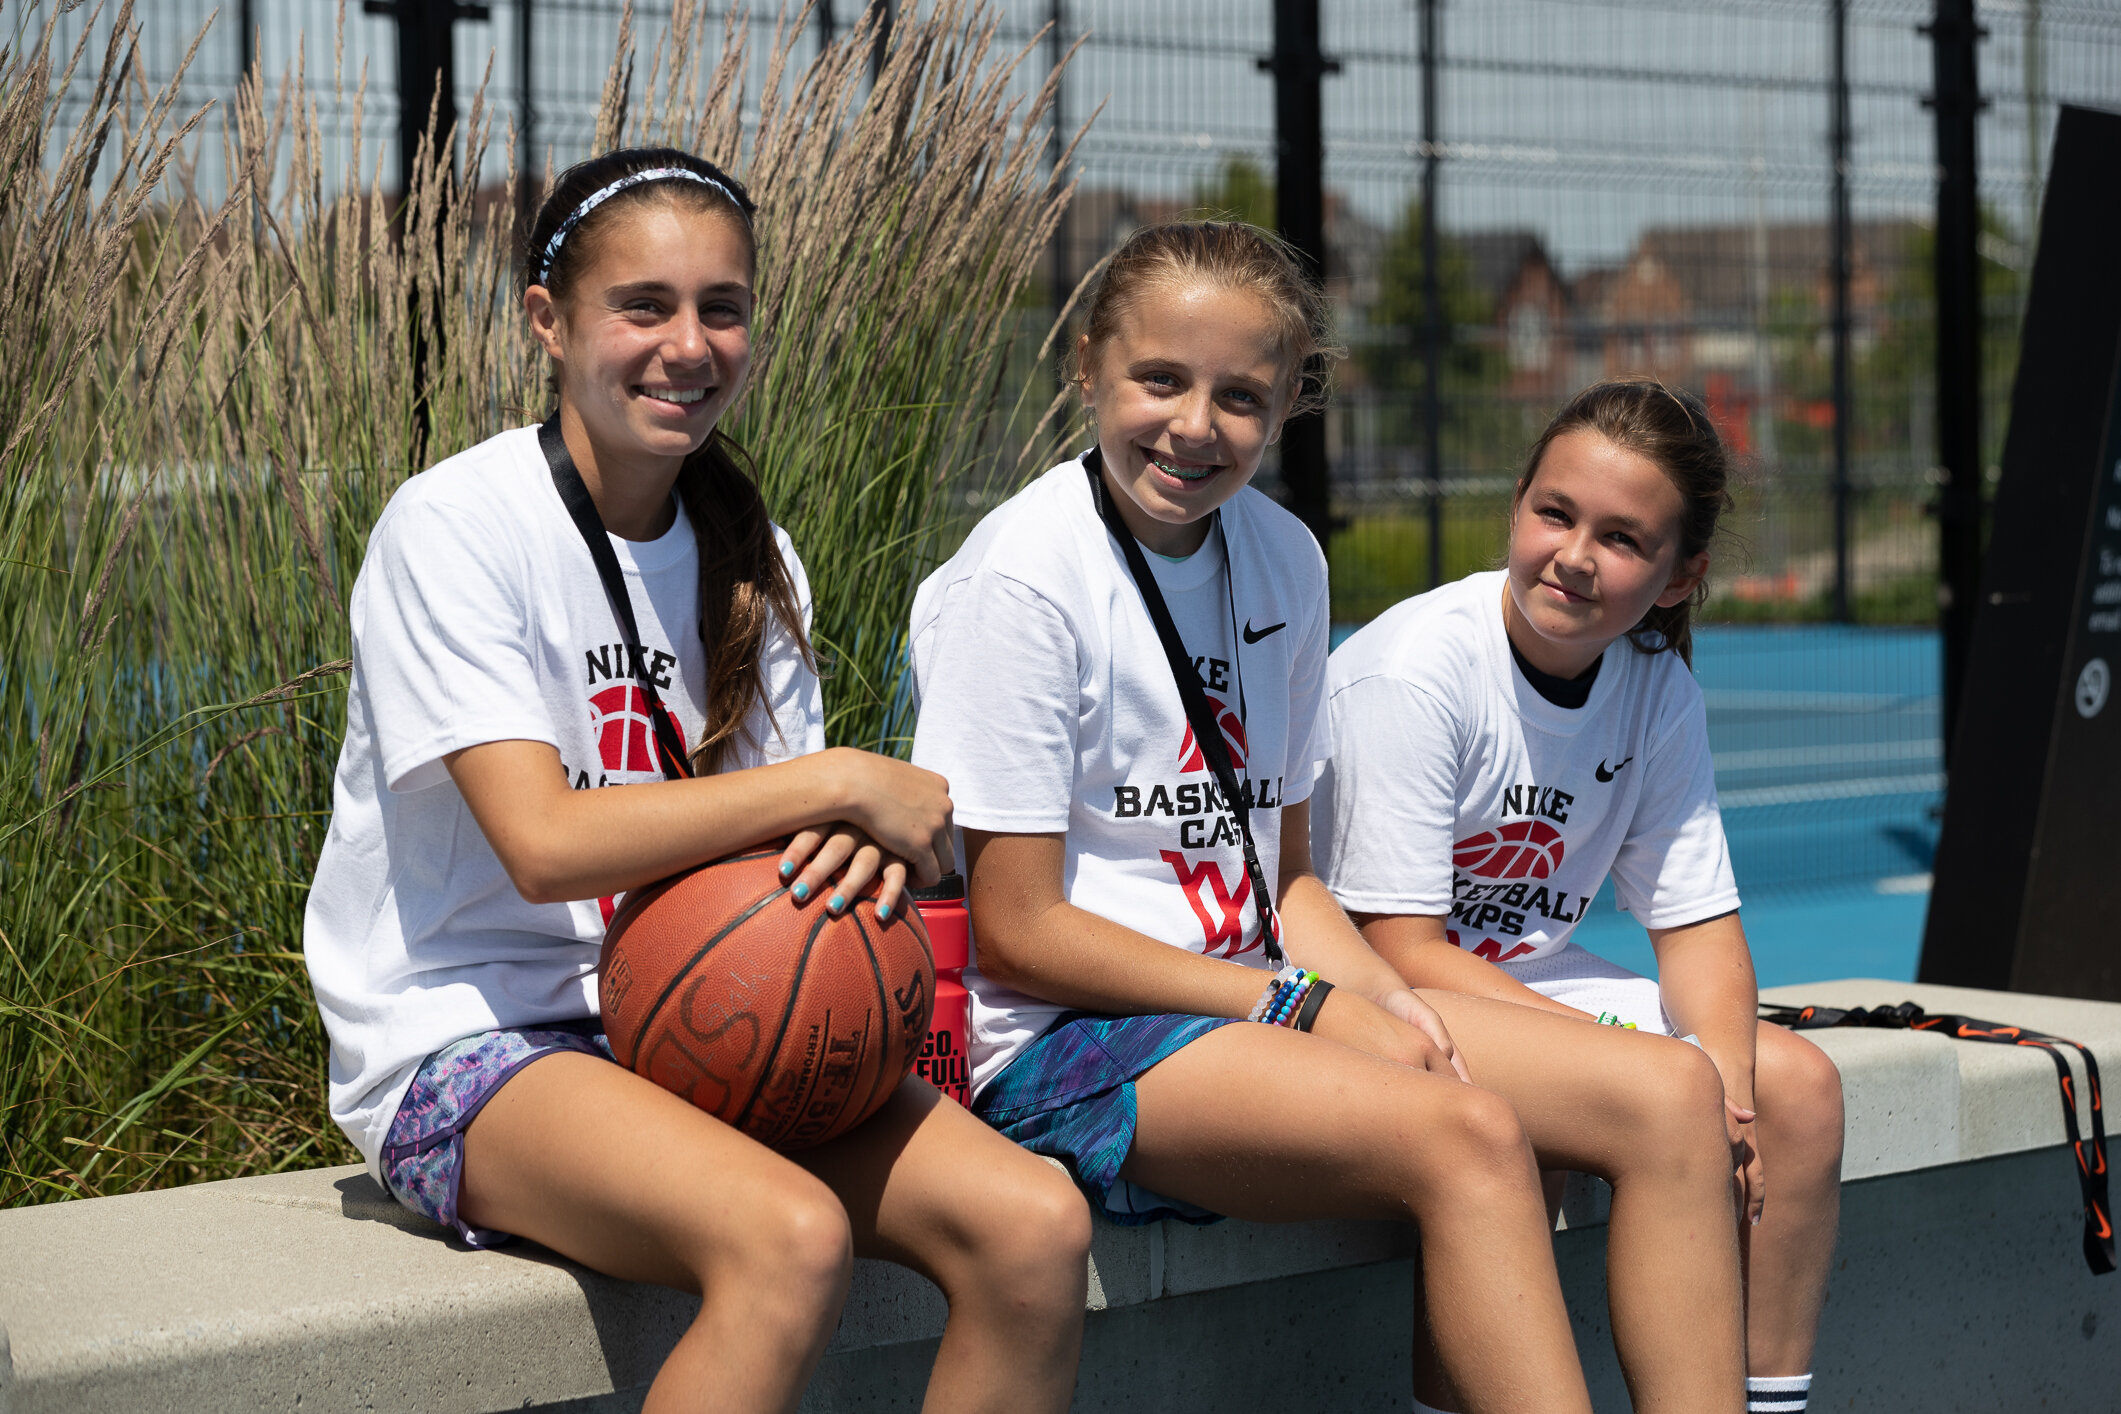 PTBOCanada Featured Post: What Time 2 Hoop and Nike Basketball Camps Have  to Offer at The Playground East Peterborough This Summer — PtboCanada